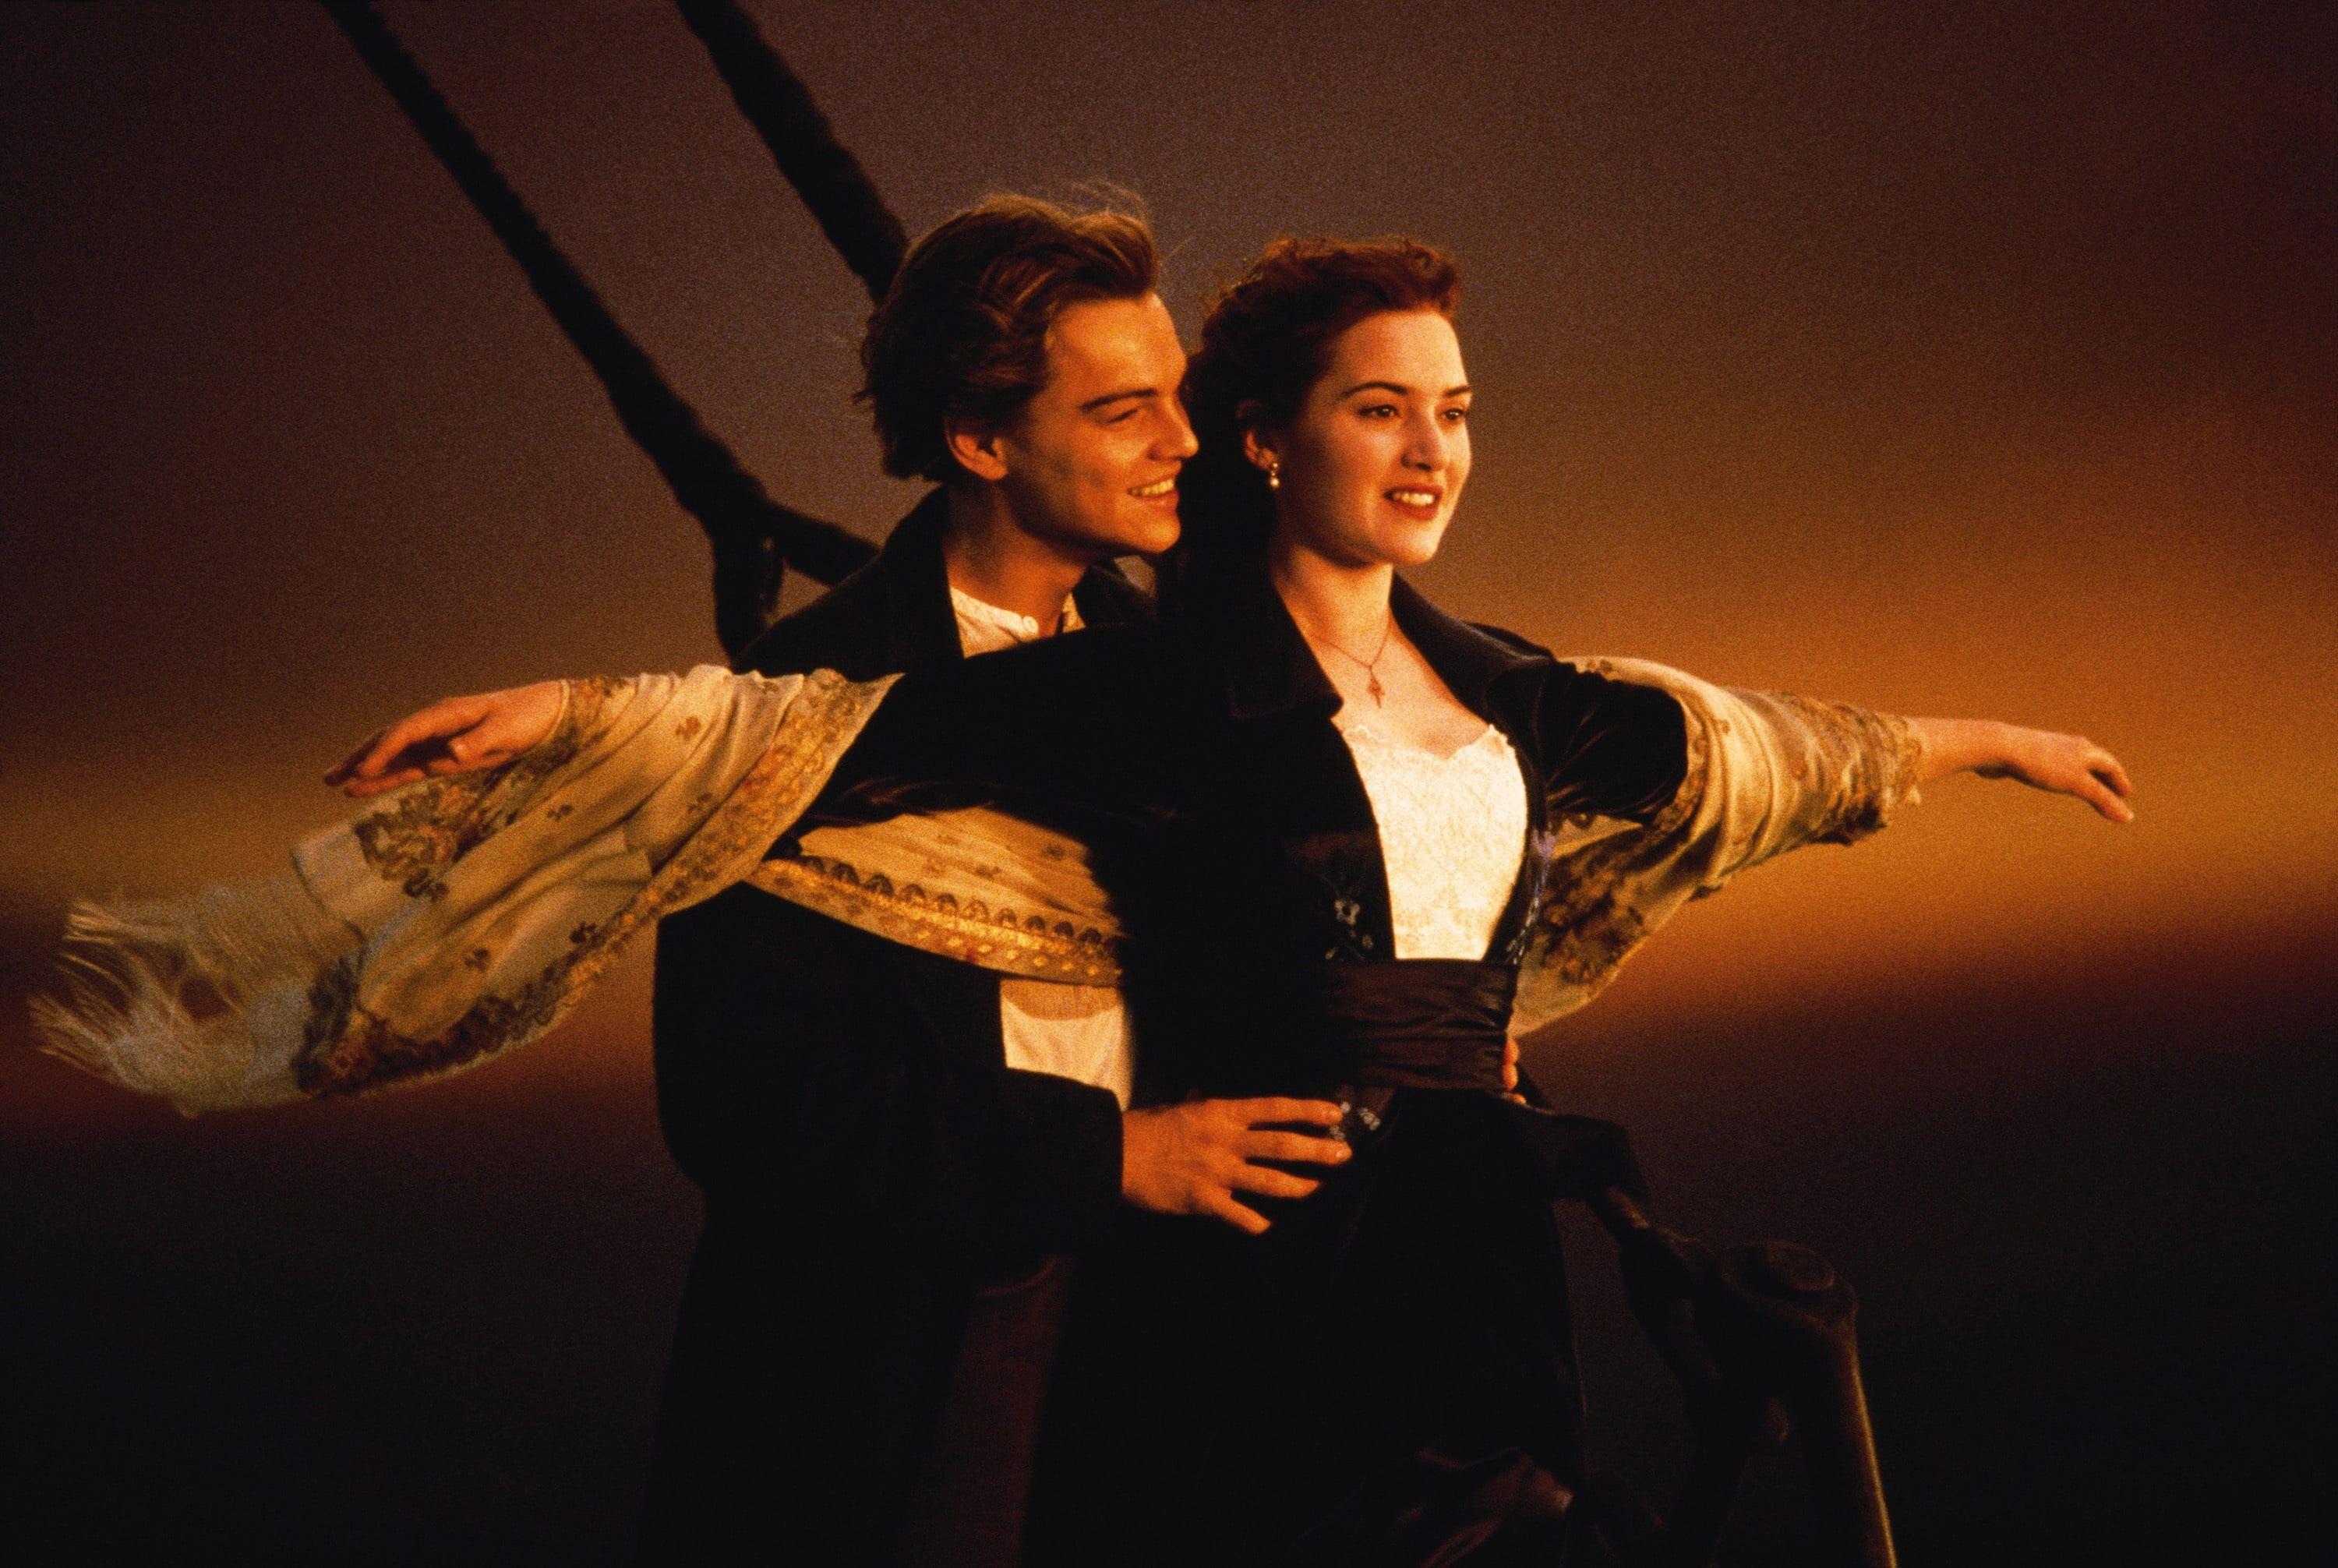 Jack And Rose Titanic HD Wallpapers - Wallpaper Cave